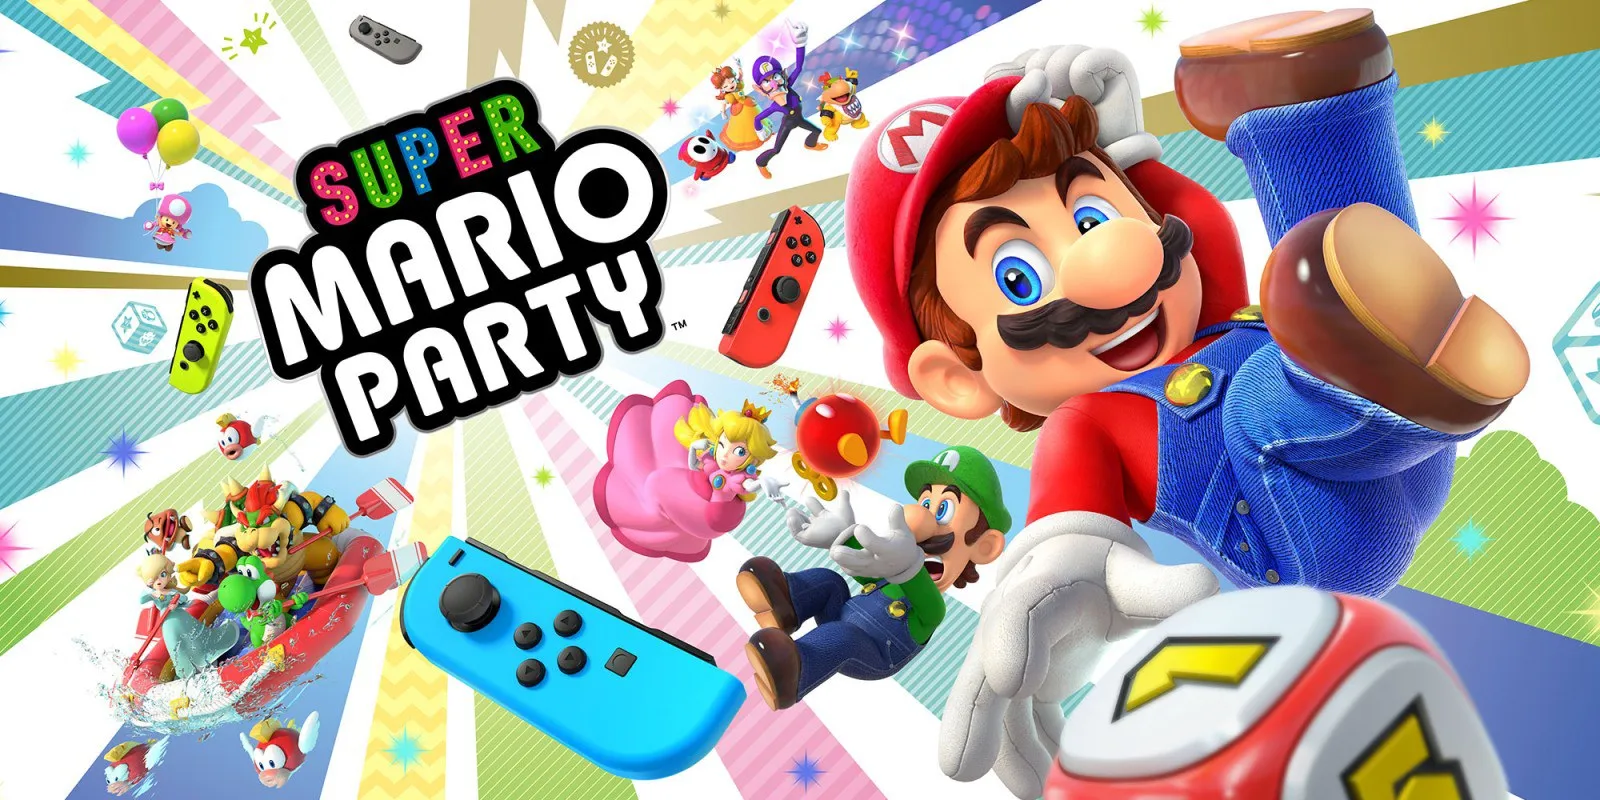 h2x1 nswitch supermarioparty image1600wf1656340606